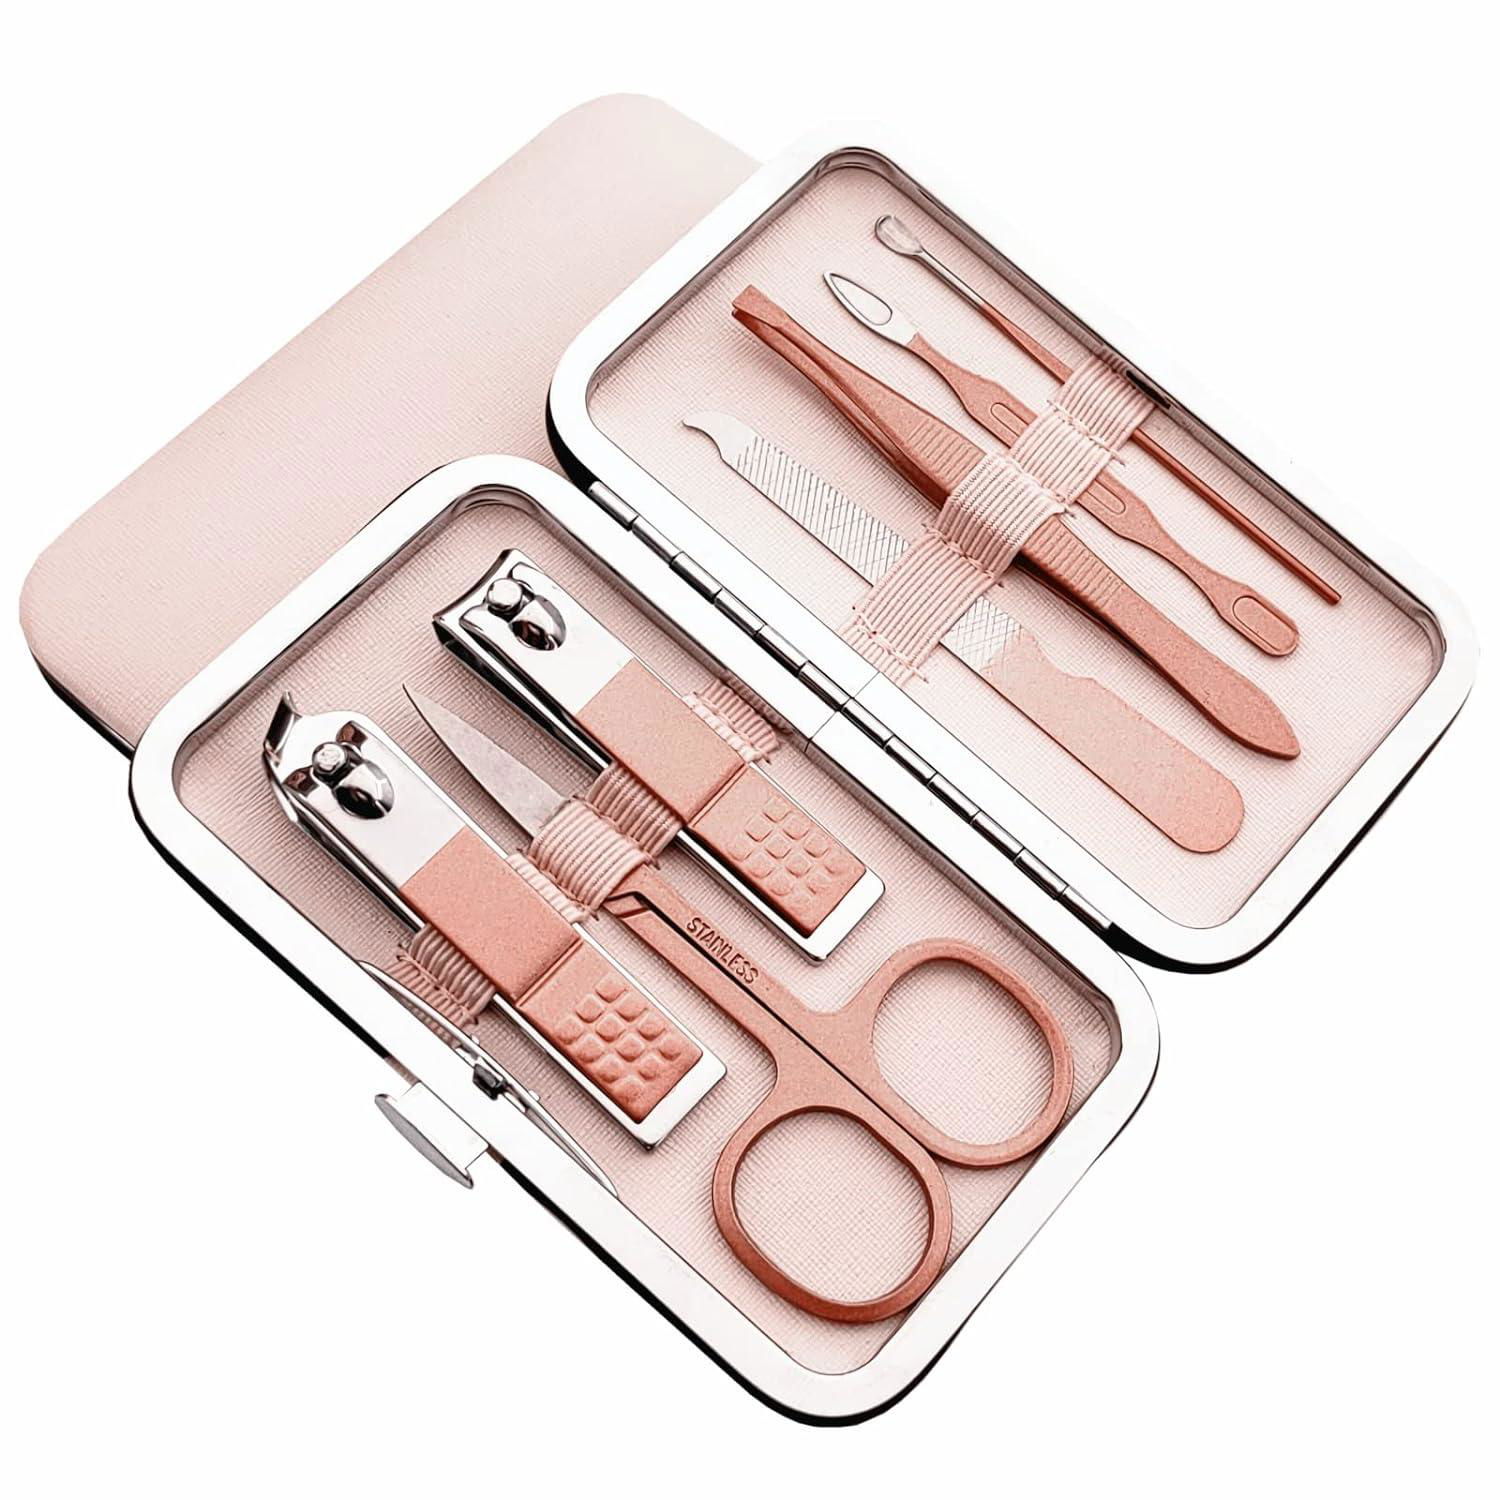 Manicure Set 7 in 1 Rose Gold Nail Trimming Set S/S Nail Grooming Sets